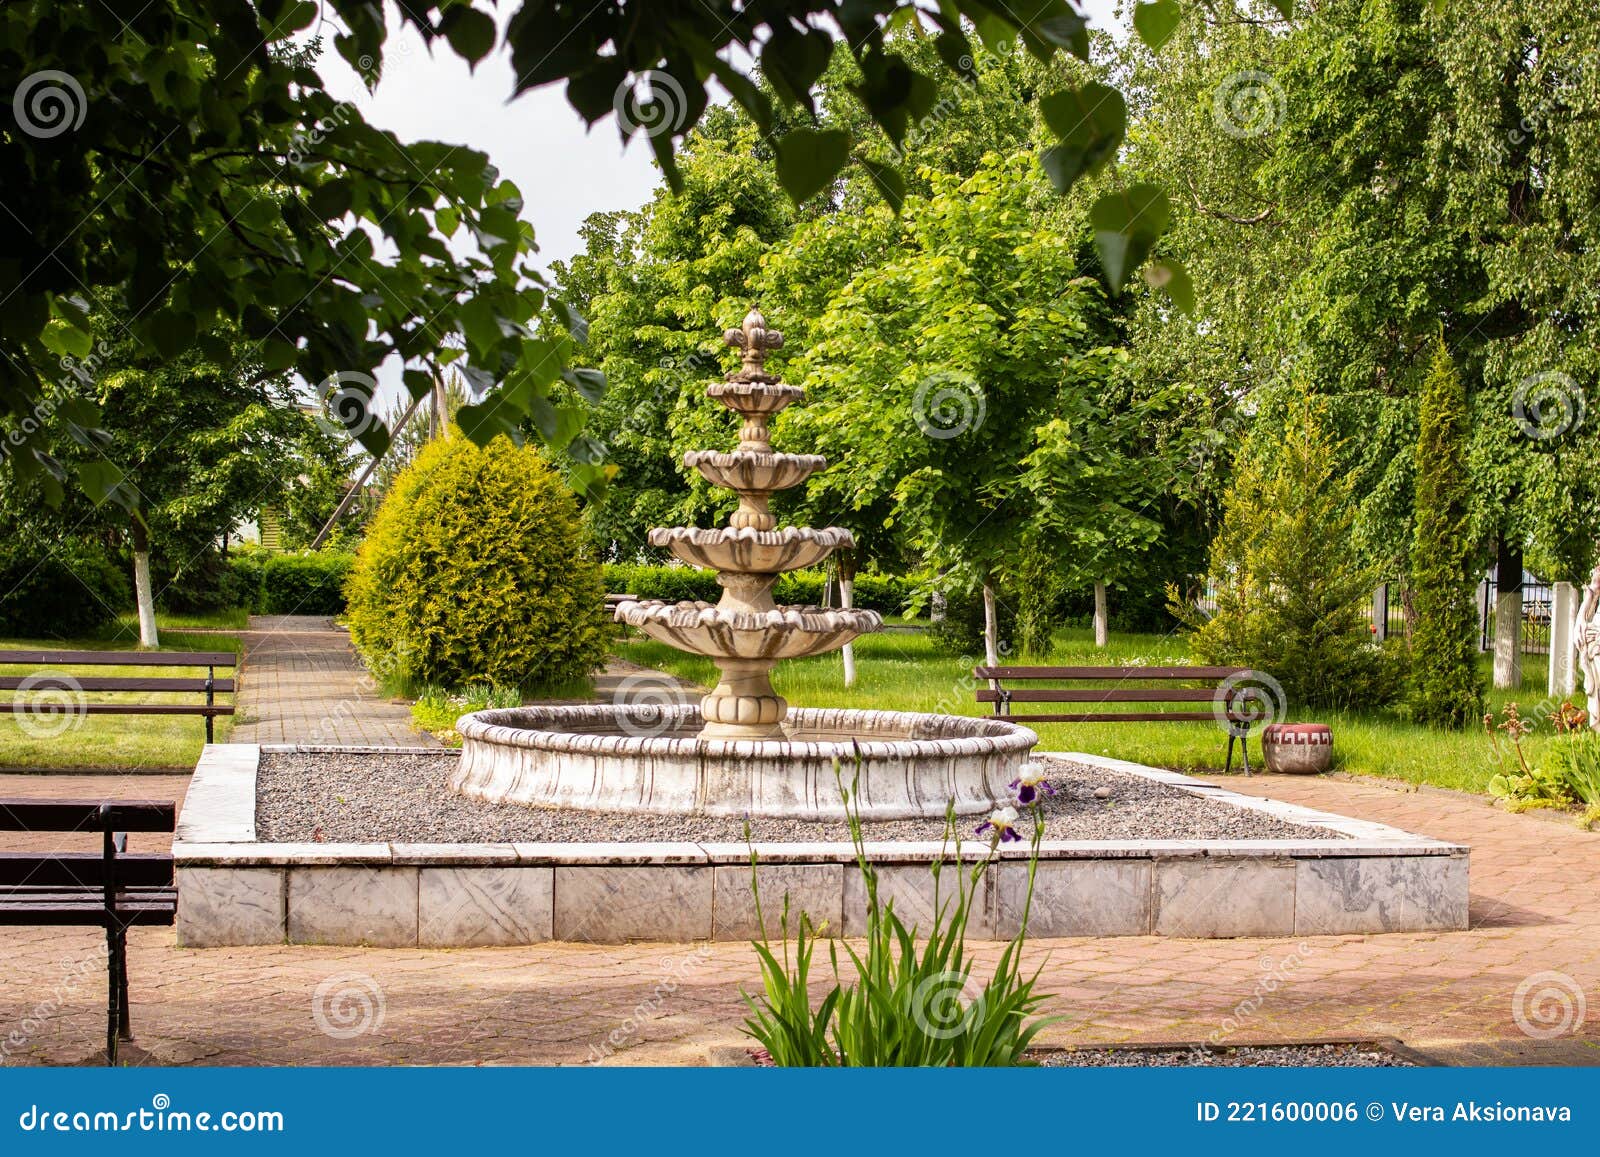 Fountain Statue in Park Against Background of Green Bushes Stock Photo ...